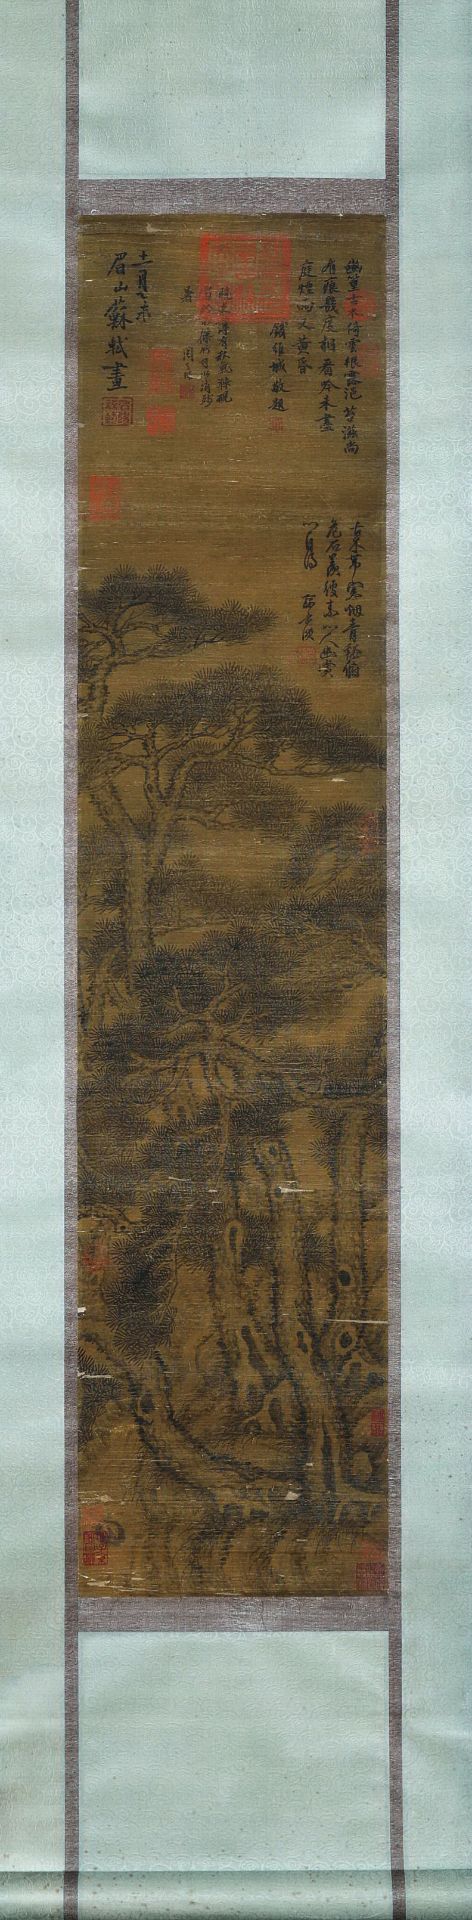 A Chinese Scroll Painting By Su Shi - Bild 9 aus 13